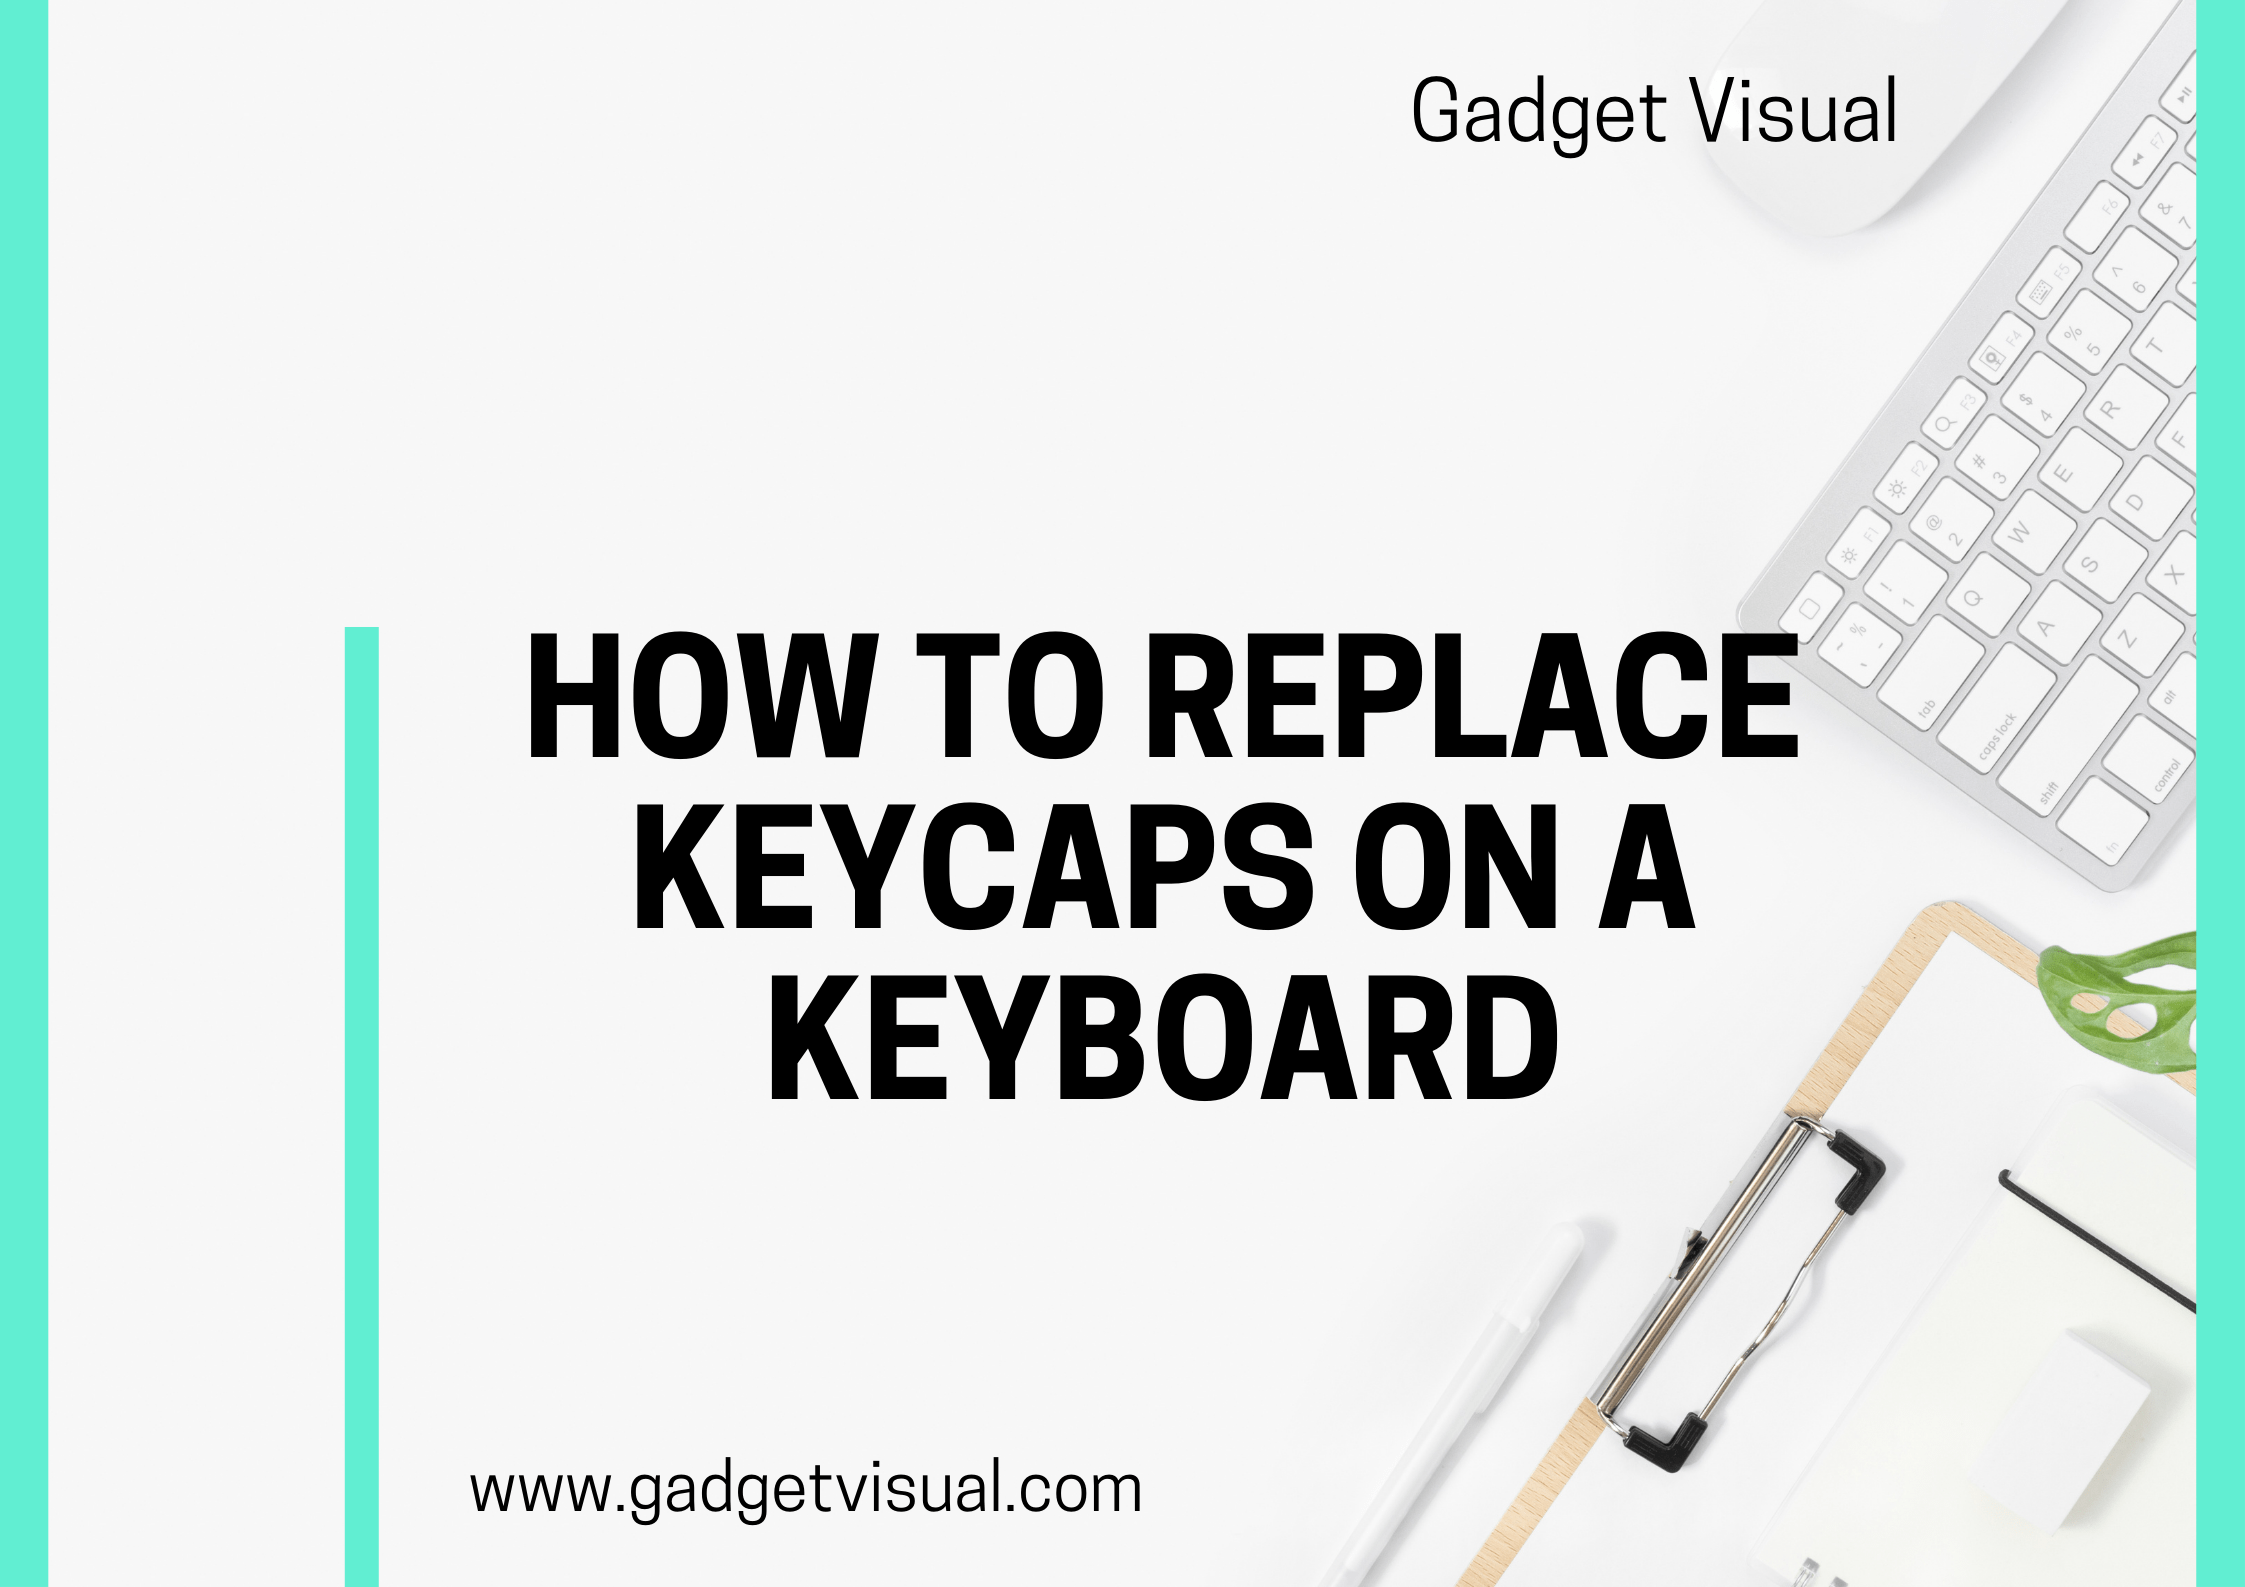 how to Replace Keycaps on a Keyboard